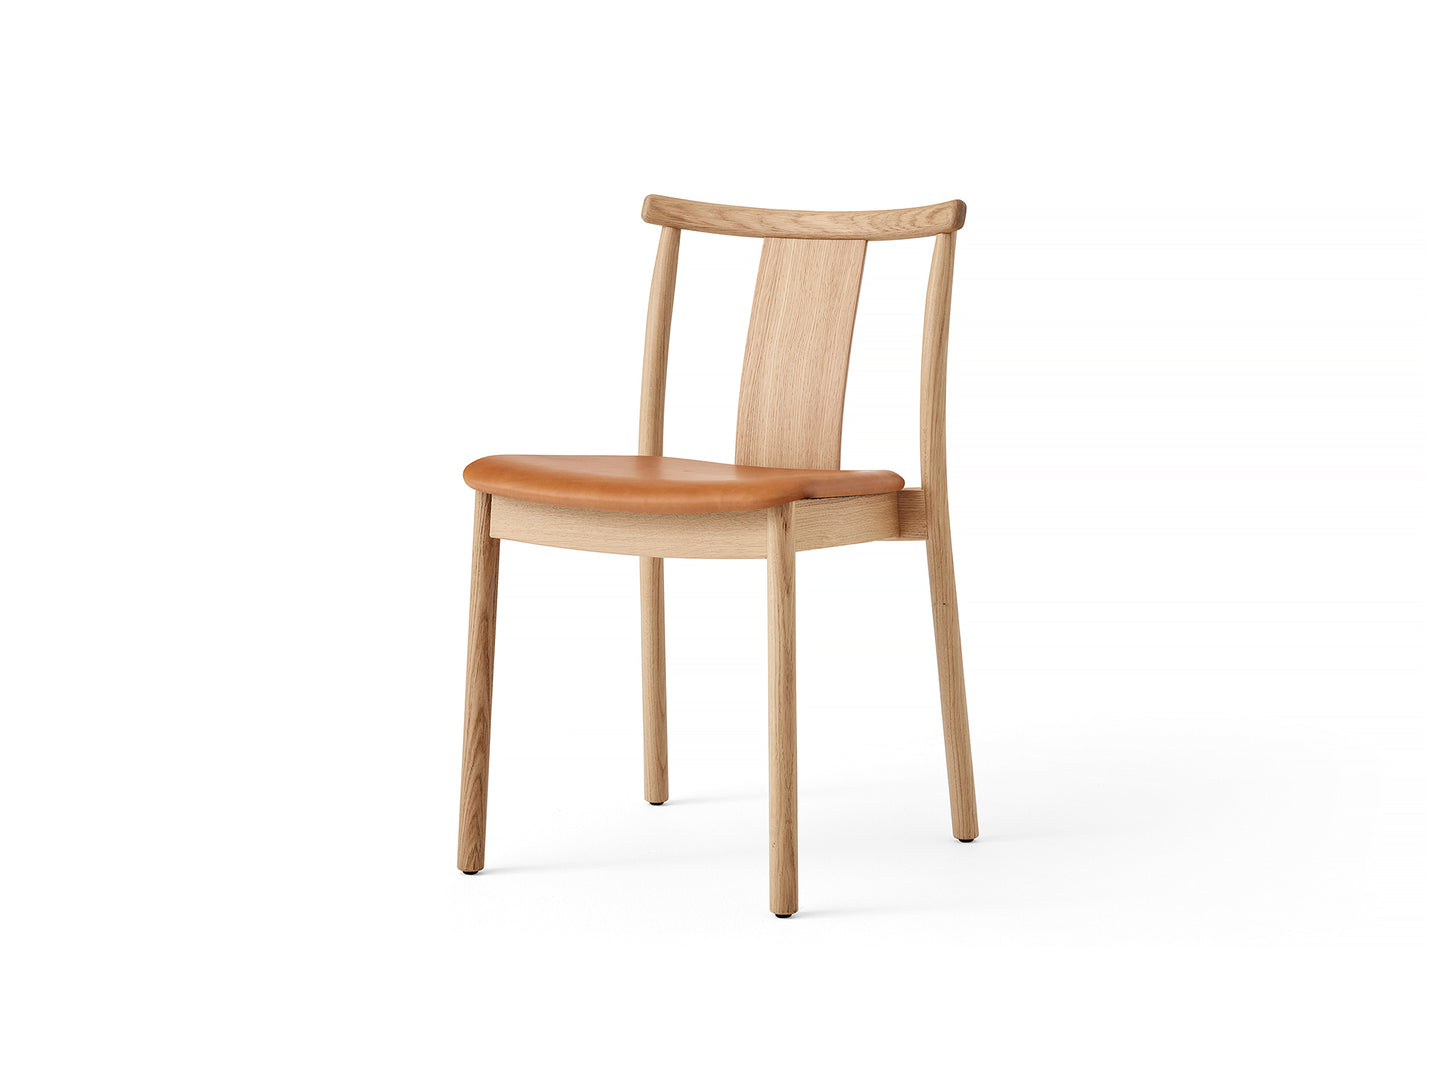 Merkur Dining Chair Upholstered by Menu - Without Armrest / Lacquered Oak / Dakar Leather 0250